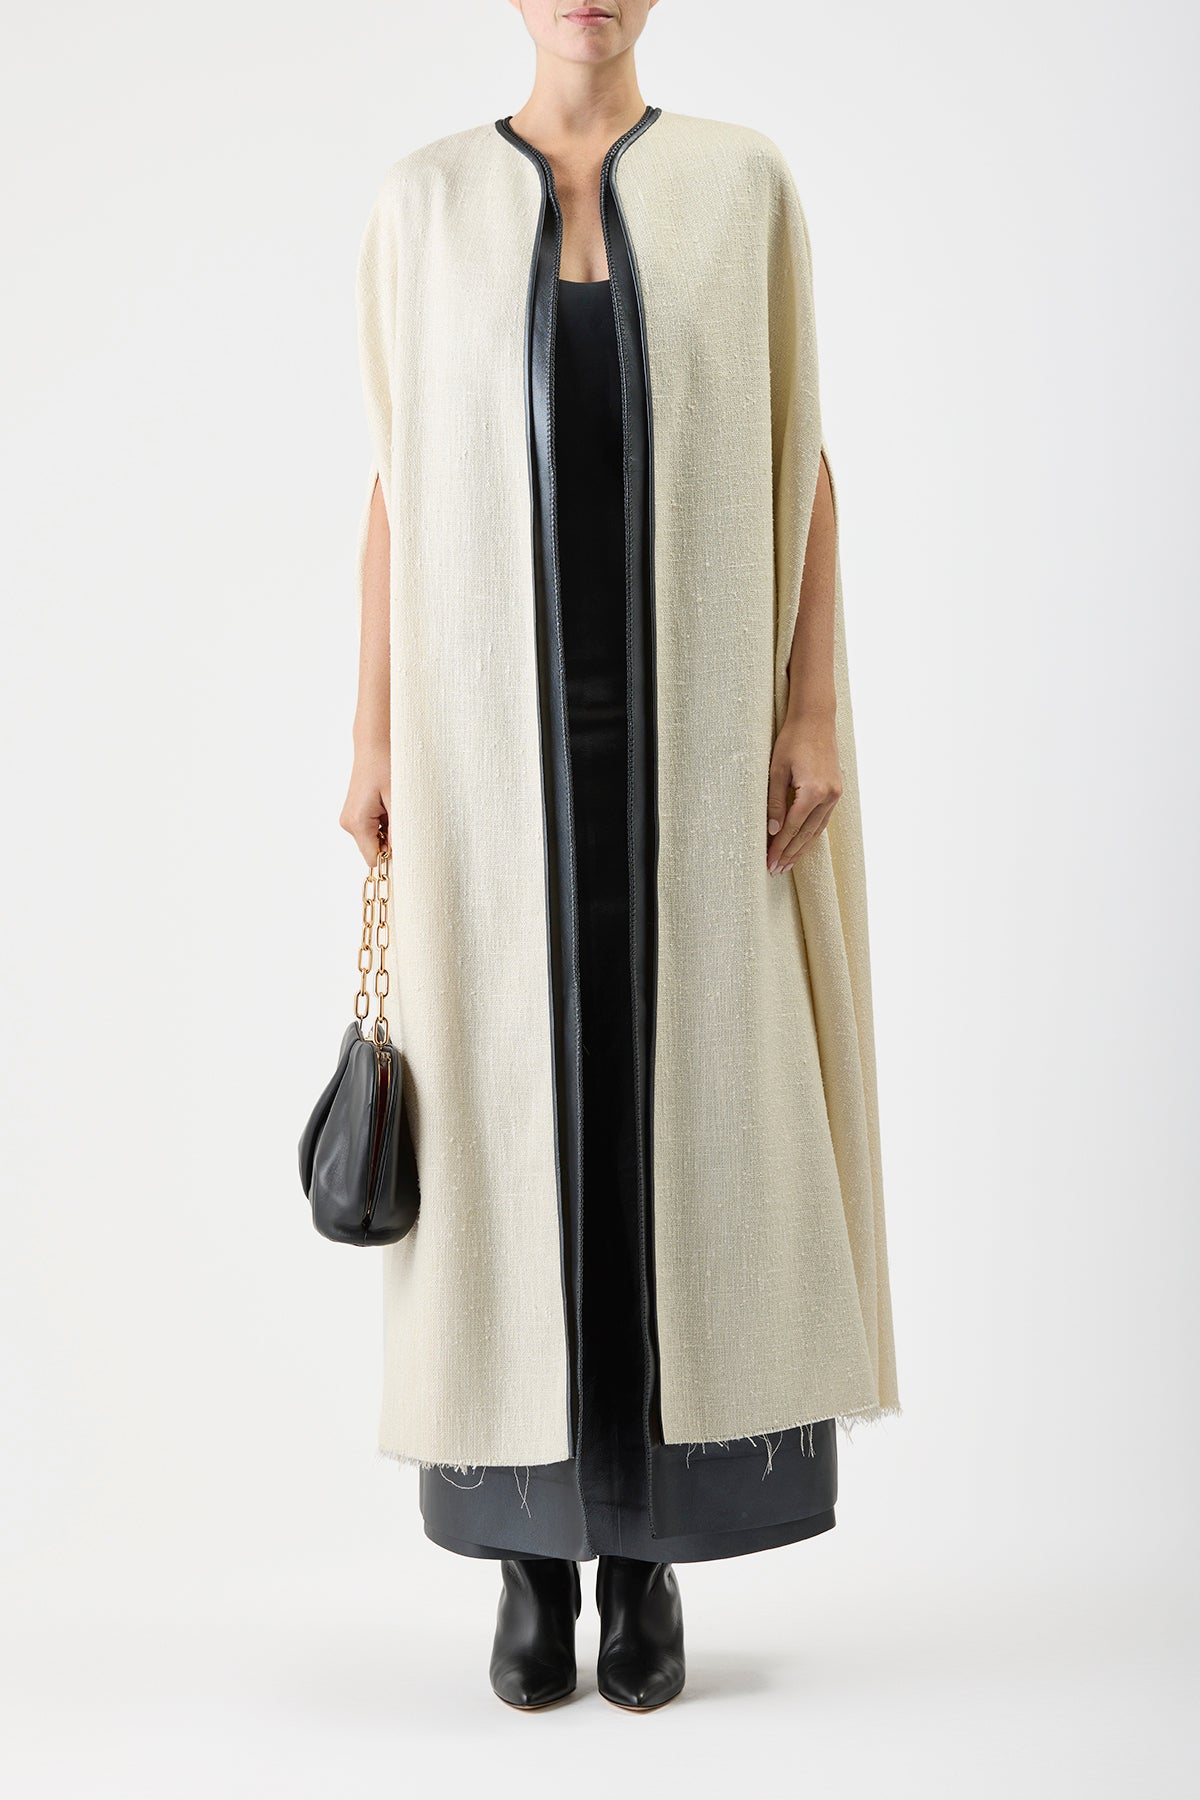 Glenys Cape in Soft Silk Wool with Leather Gilet